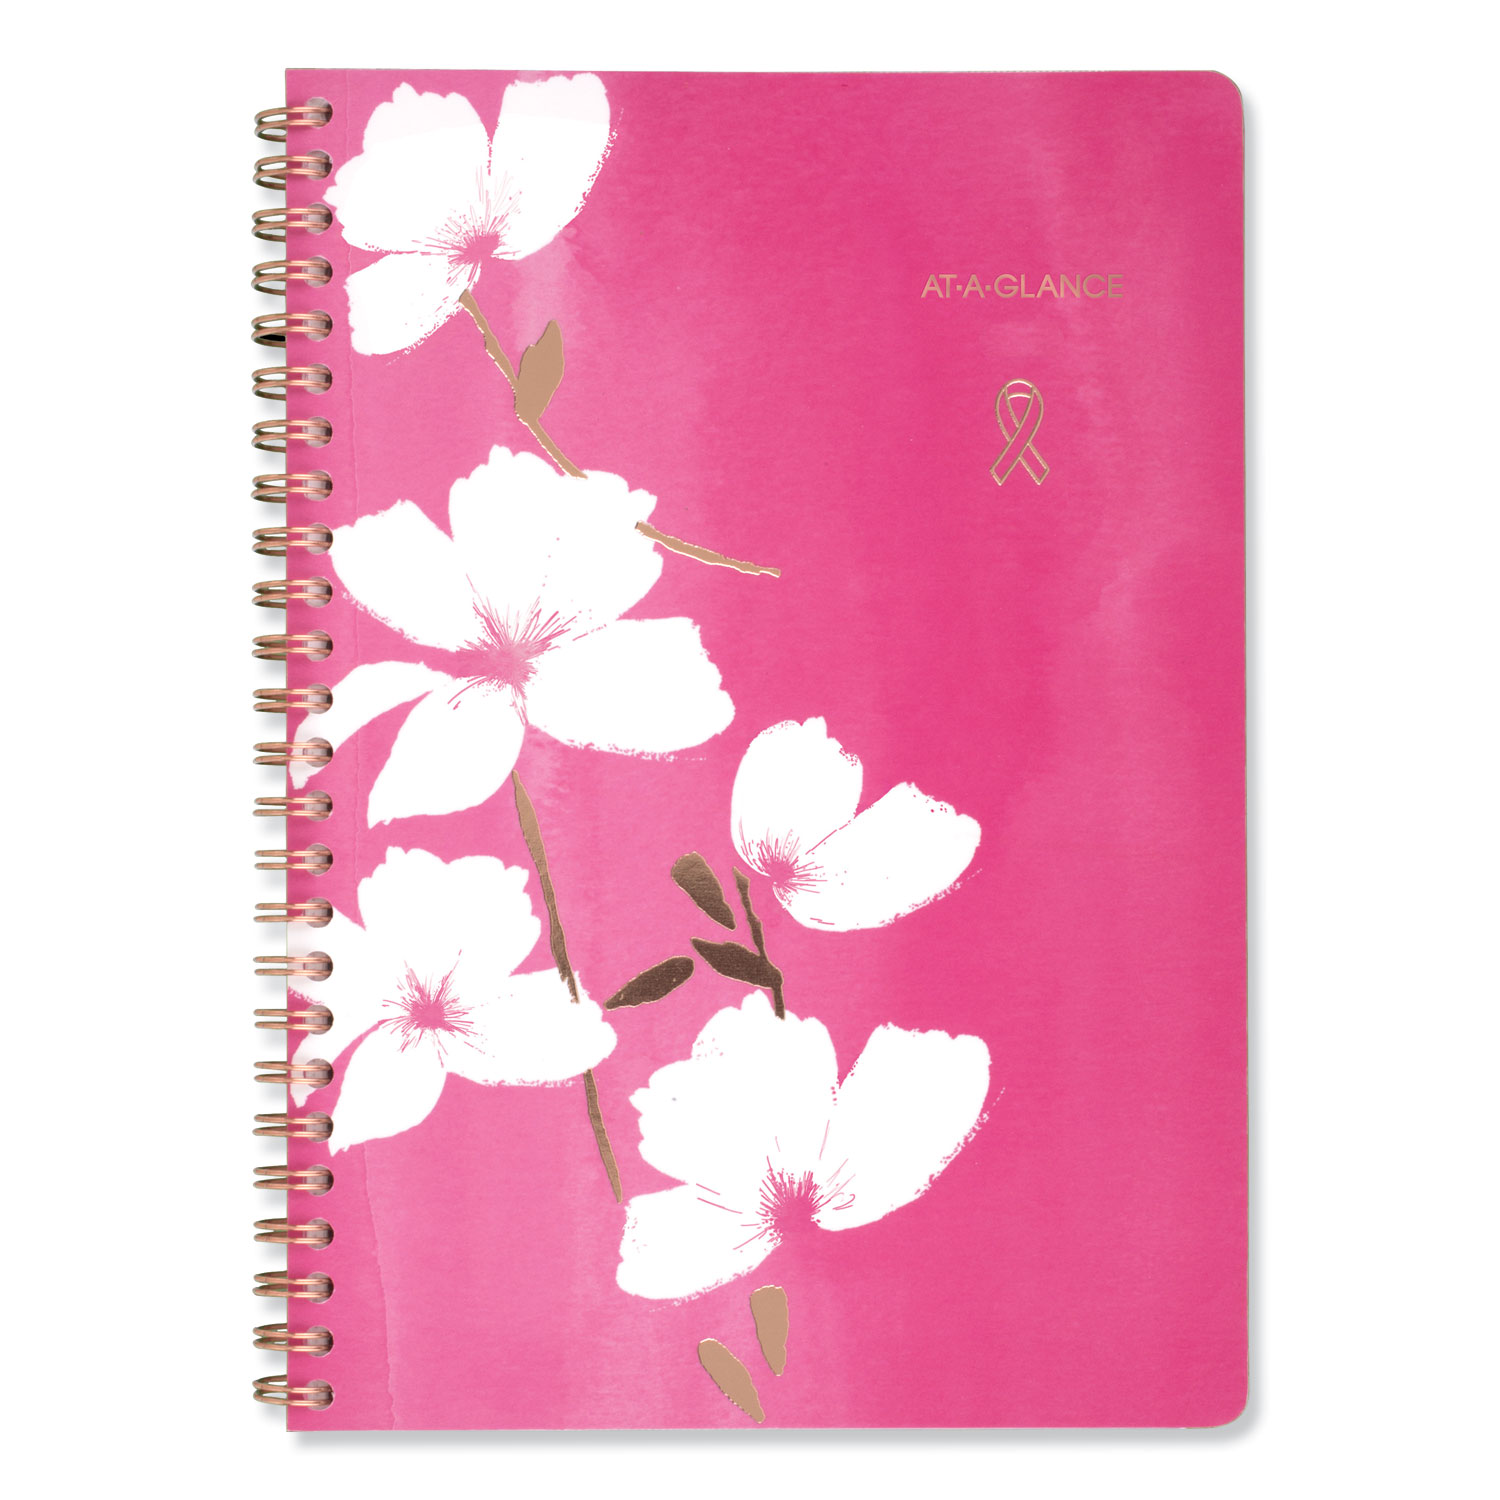  AT-A-GLANCE 5151200 Sorbet Weekly/Monthly Planner, 5 1/2 x 8 1/2, Pink/White, 2020 (AAG5151200) 